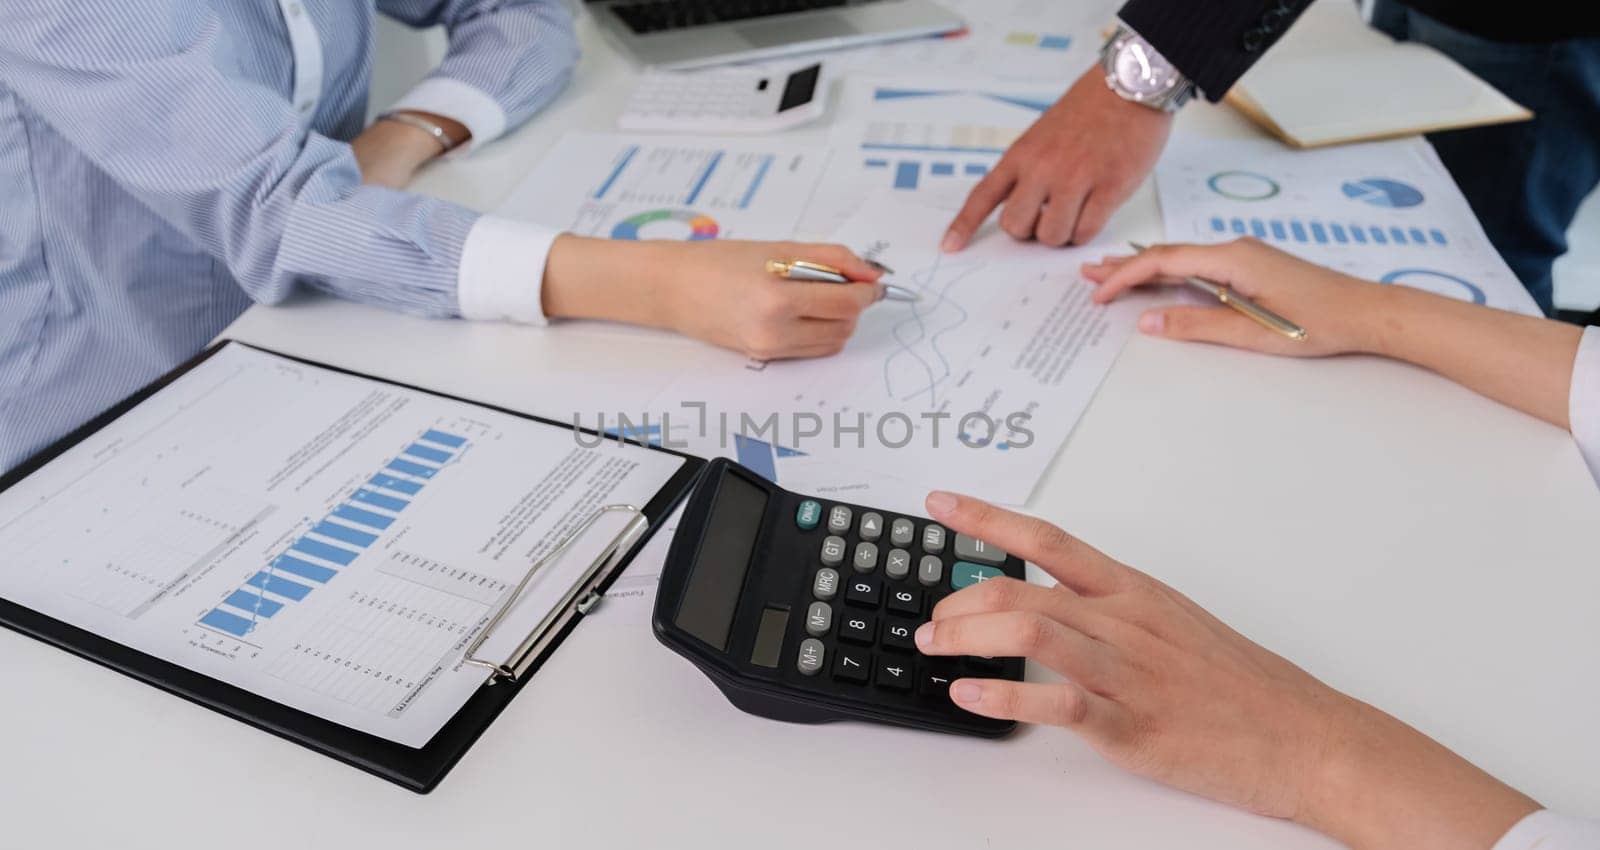 A group of accountants working together on financial calculations, analyzing data, and discussing reports in a professional office environment.